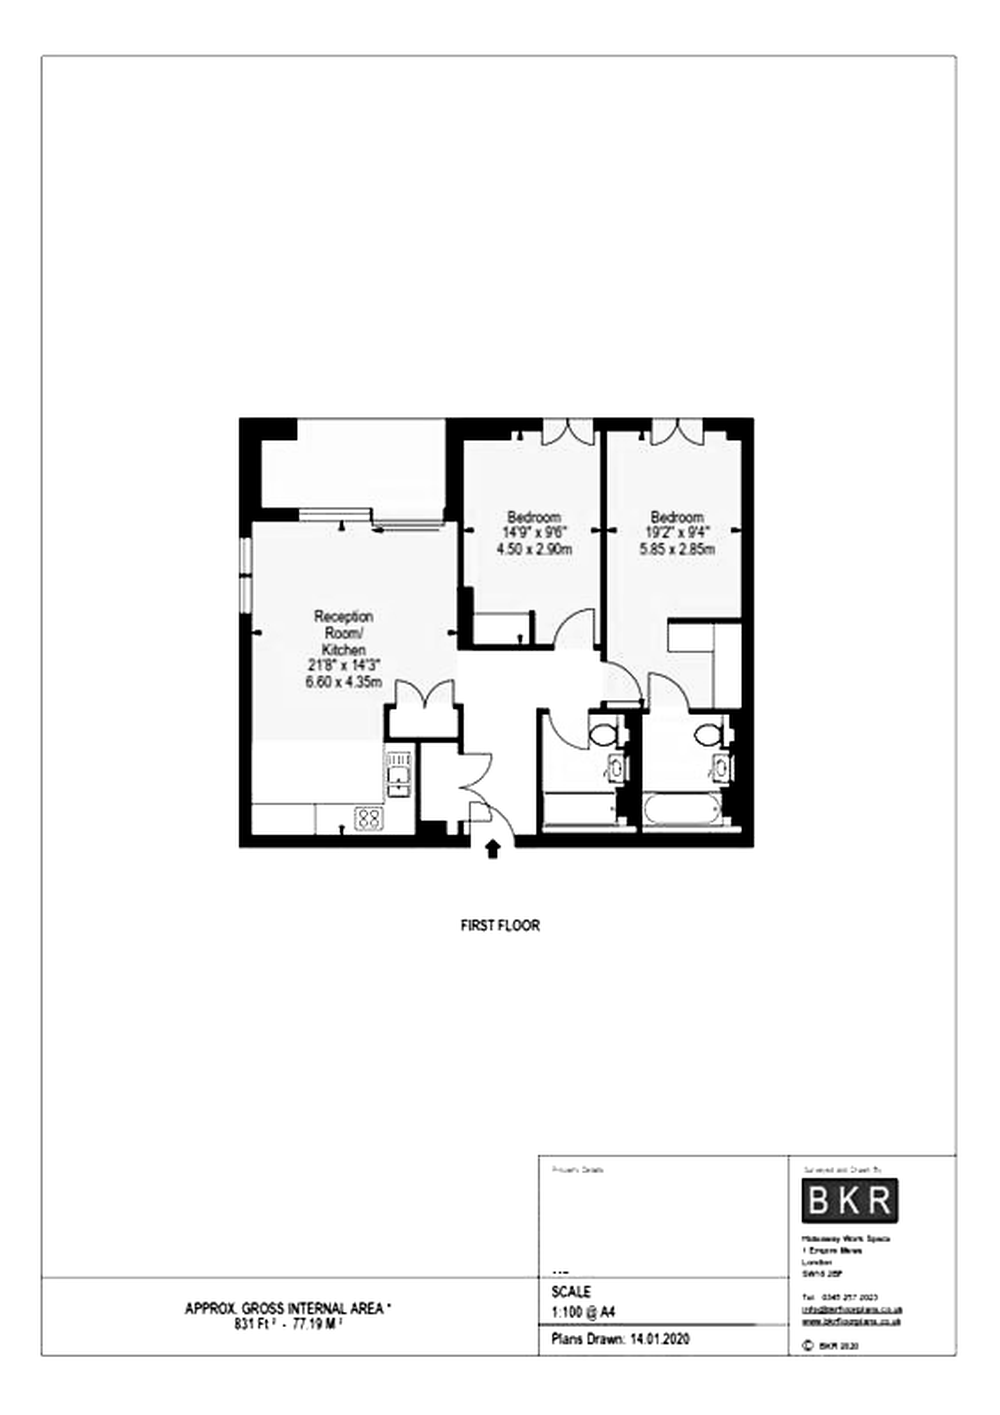 1 bed apartment to rent in Edgware Road, London - Property floorplan